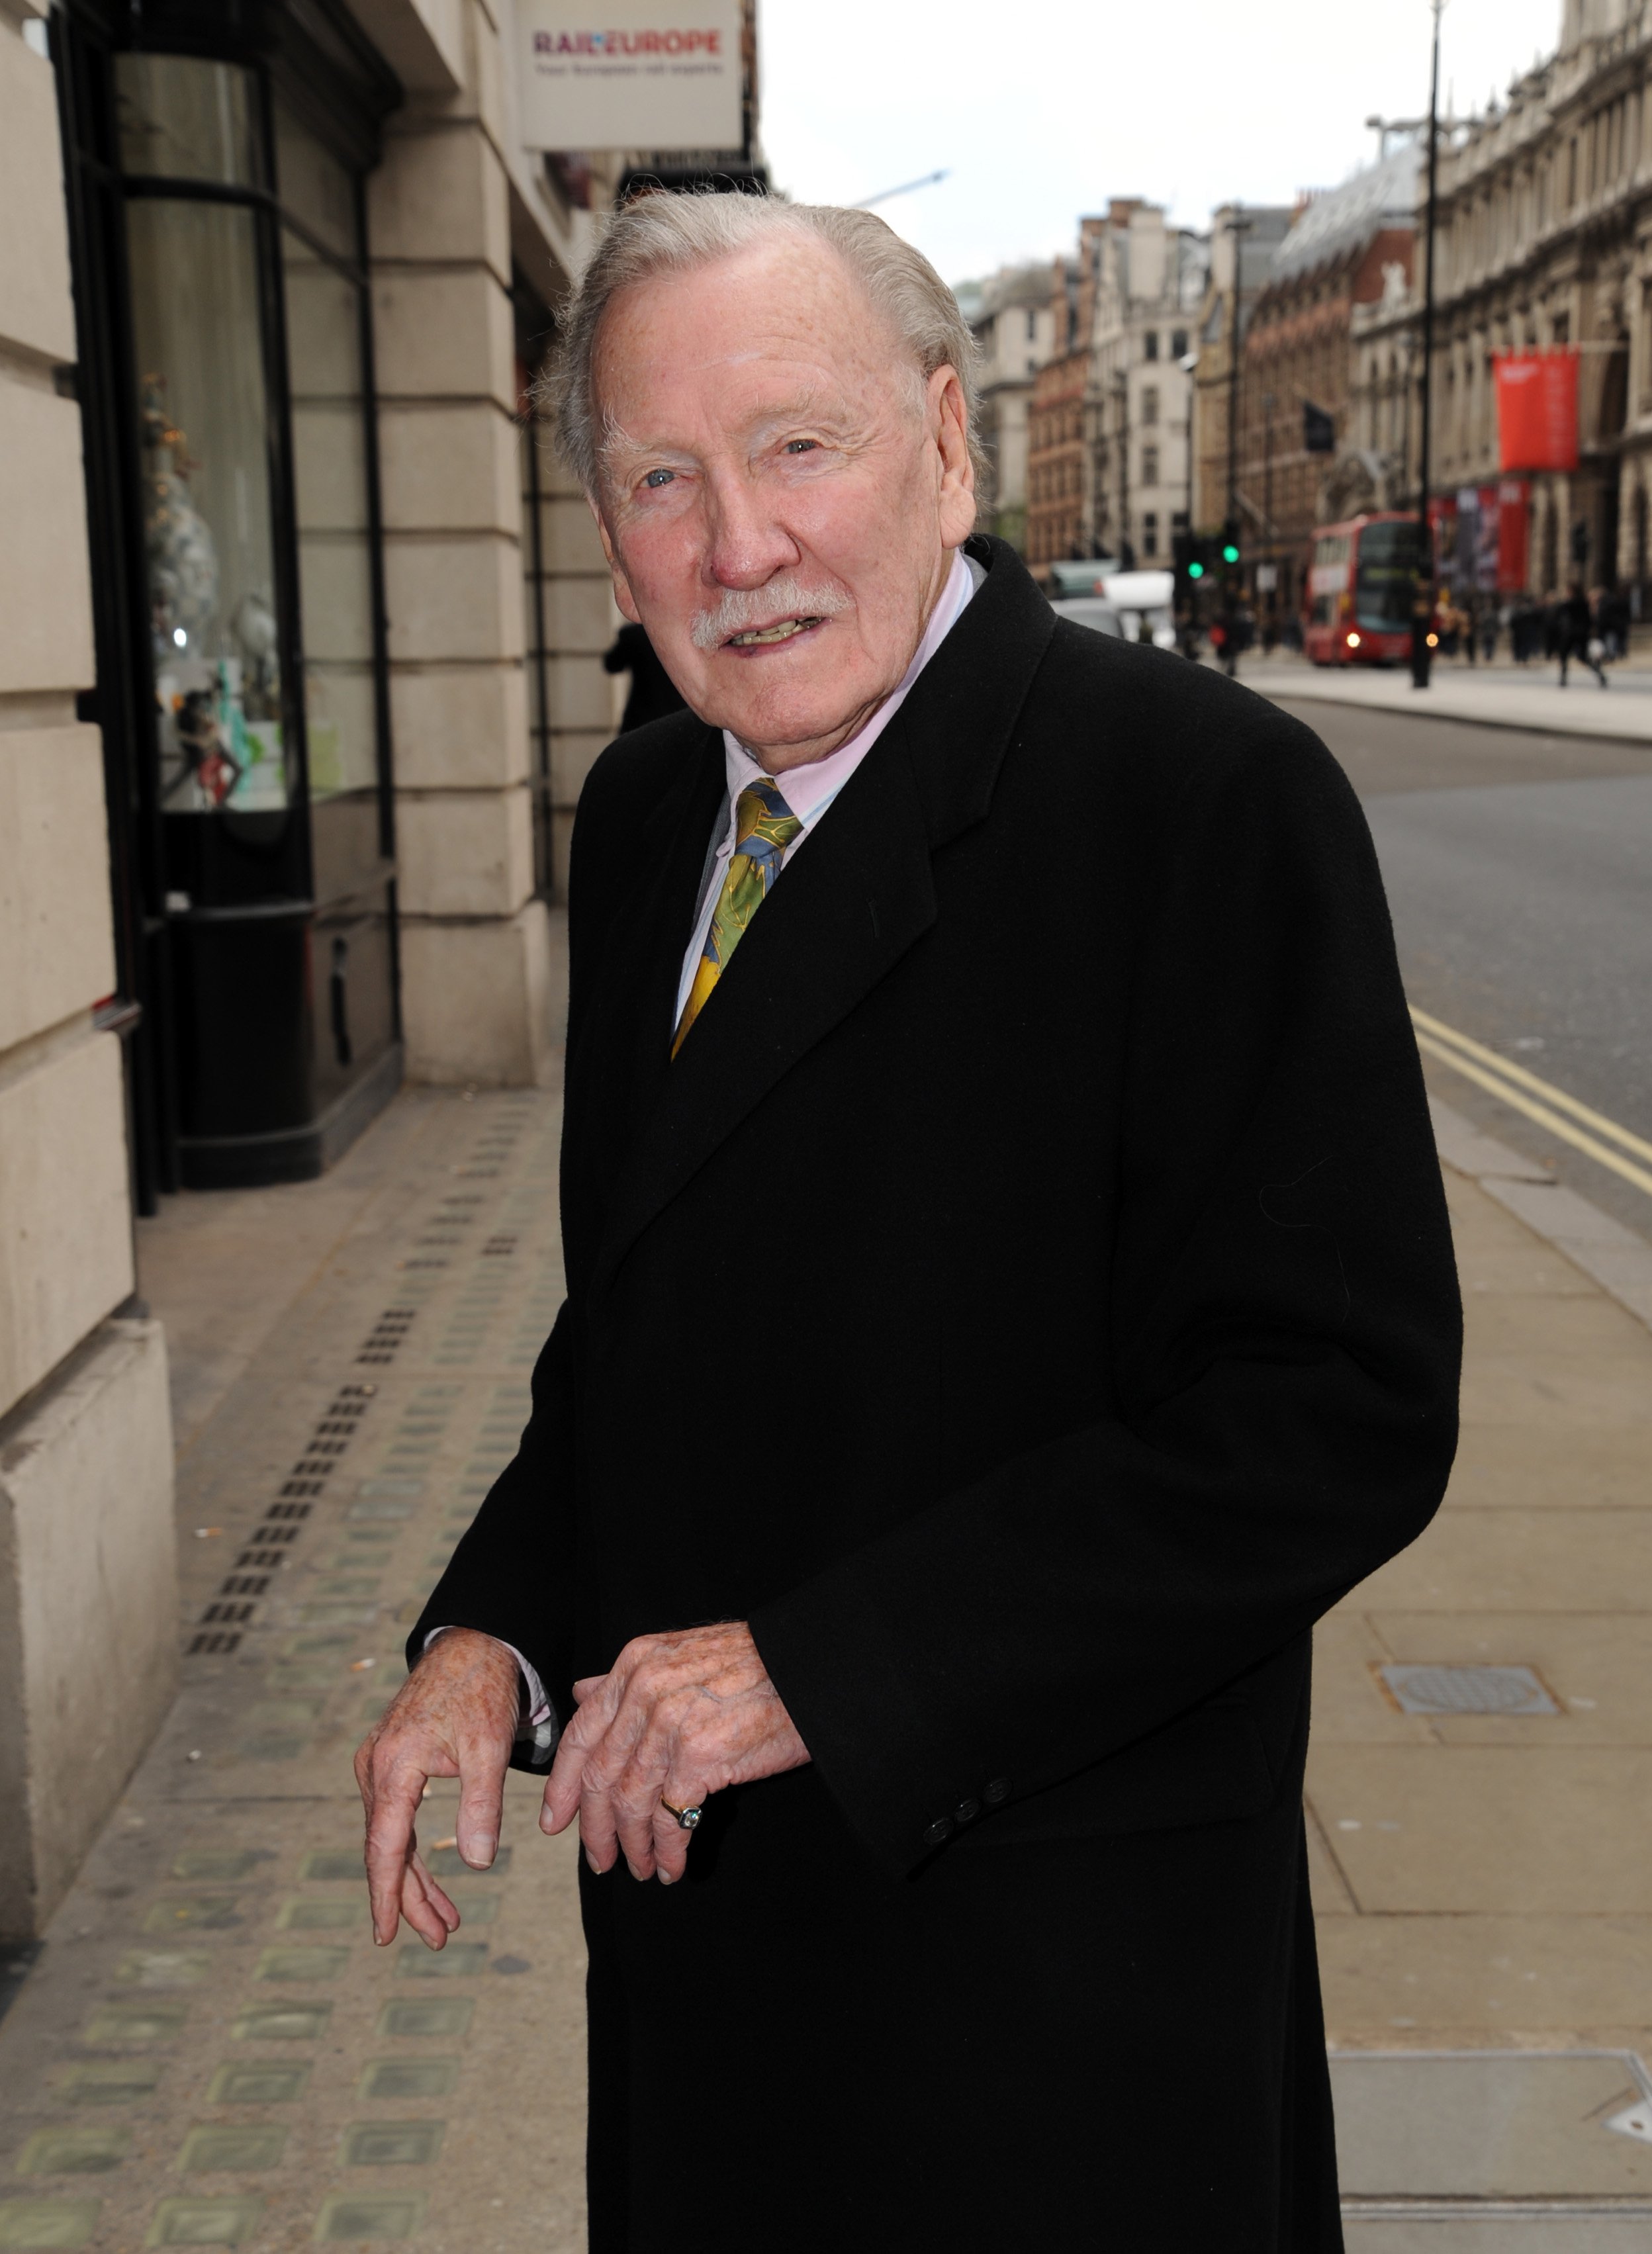 Leslie Phillips on May 10, 2013, in London, England | Source: Getty Images